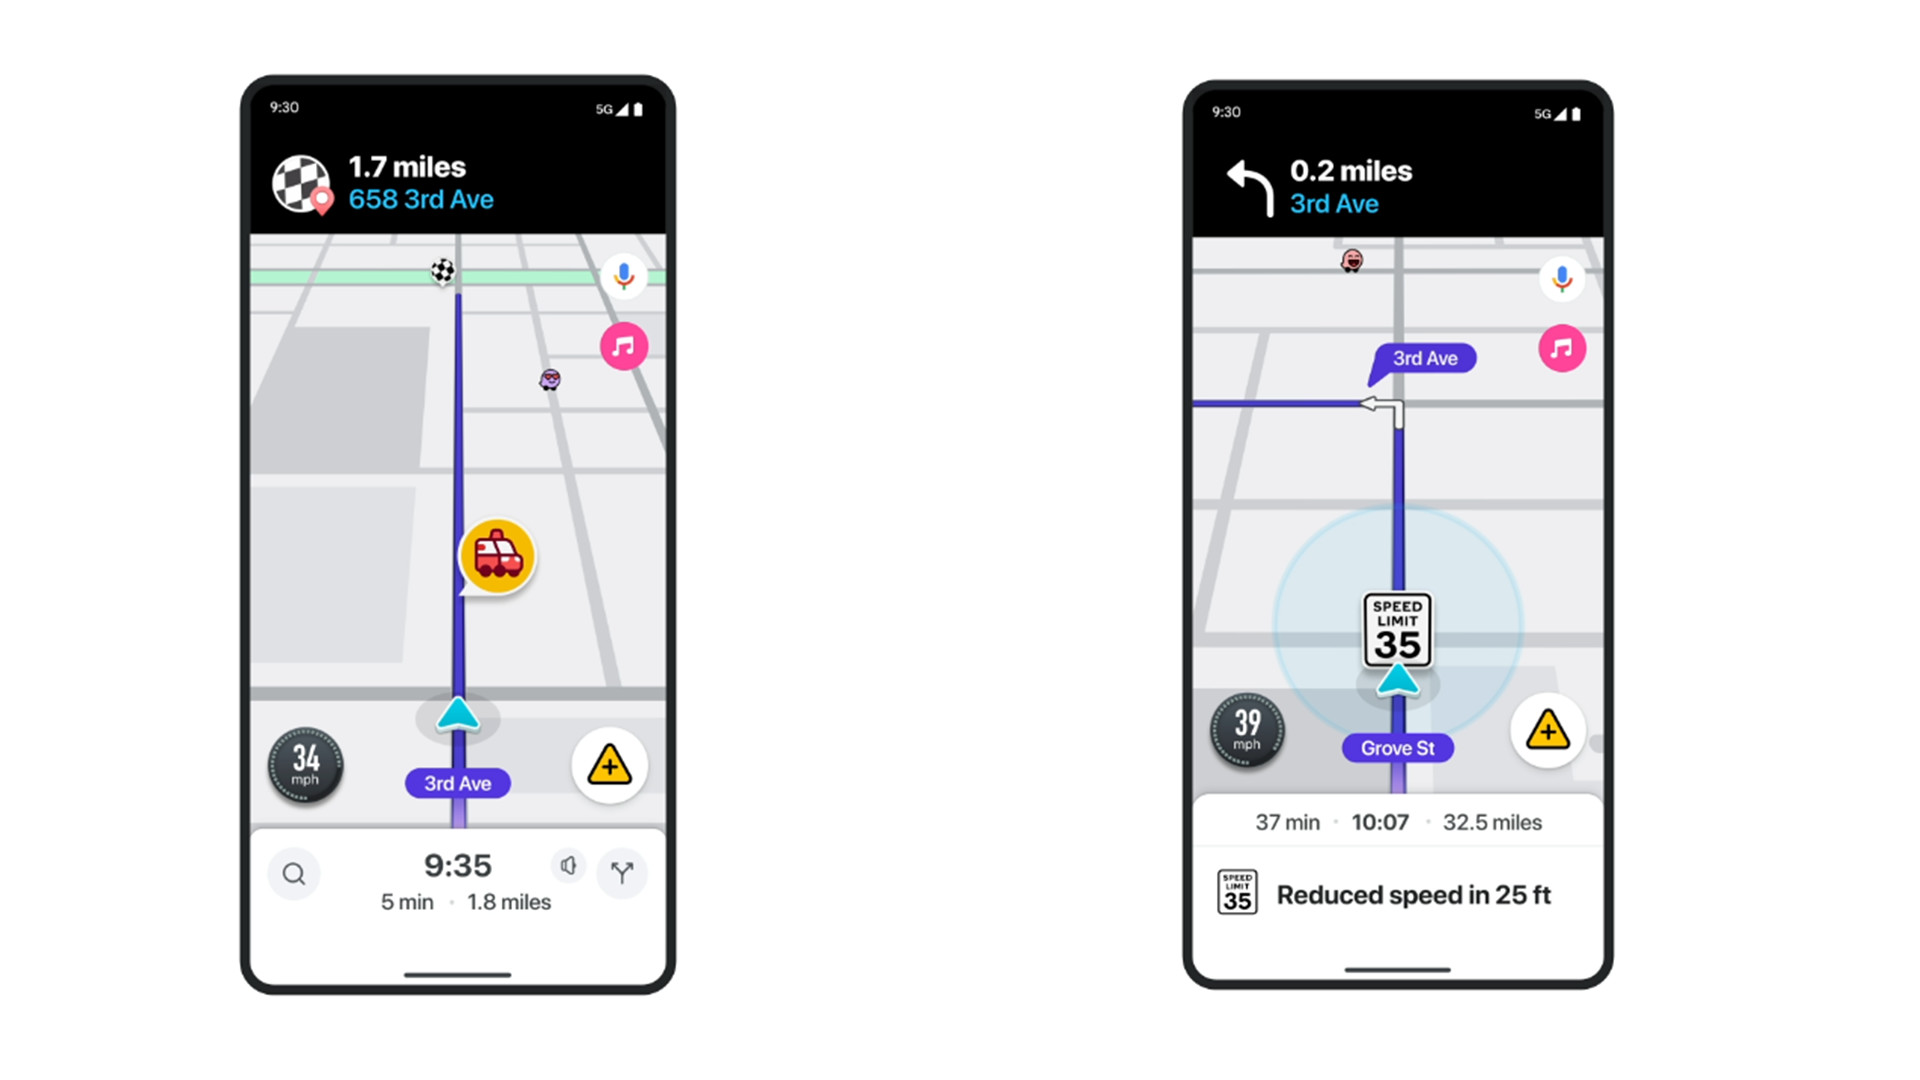 Waze's new speed limit and emergency vehicle alerts